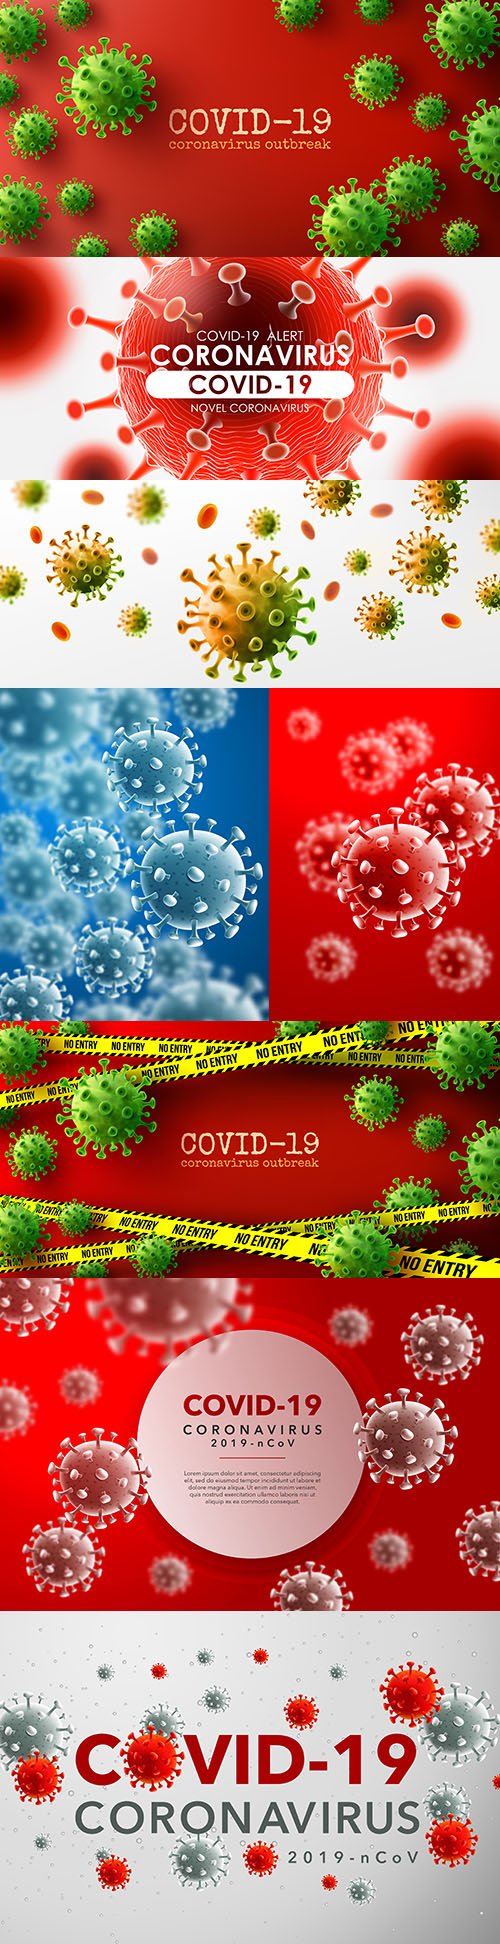 Coronavirus background with bacteria and disease cells 3